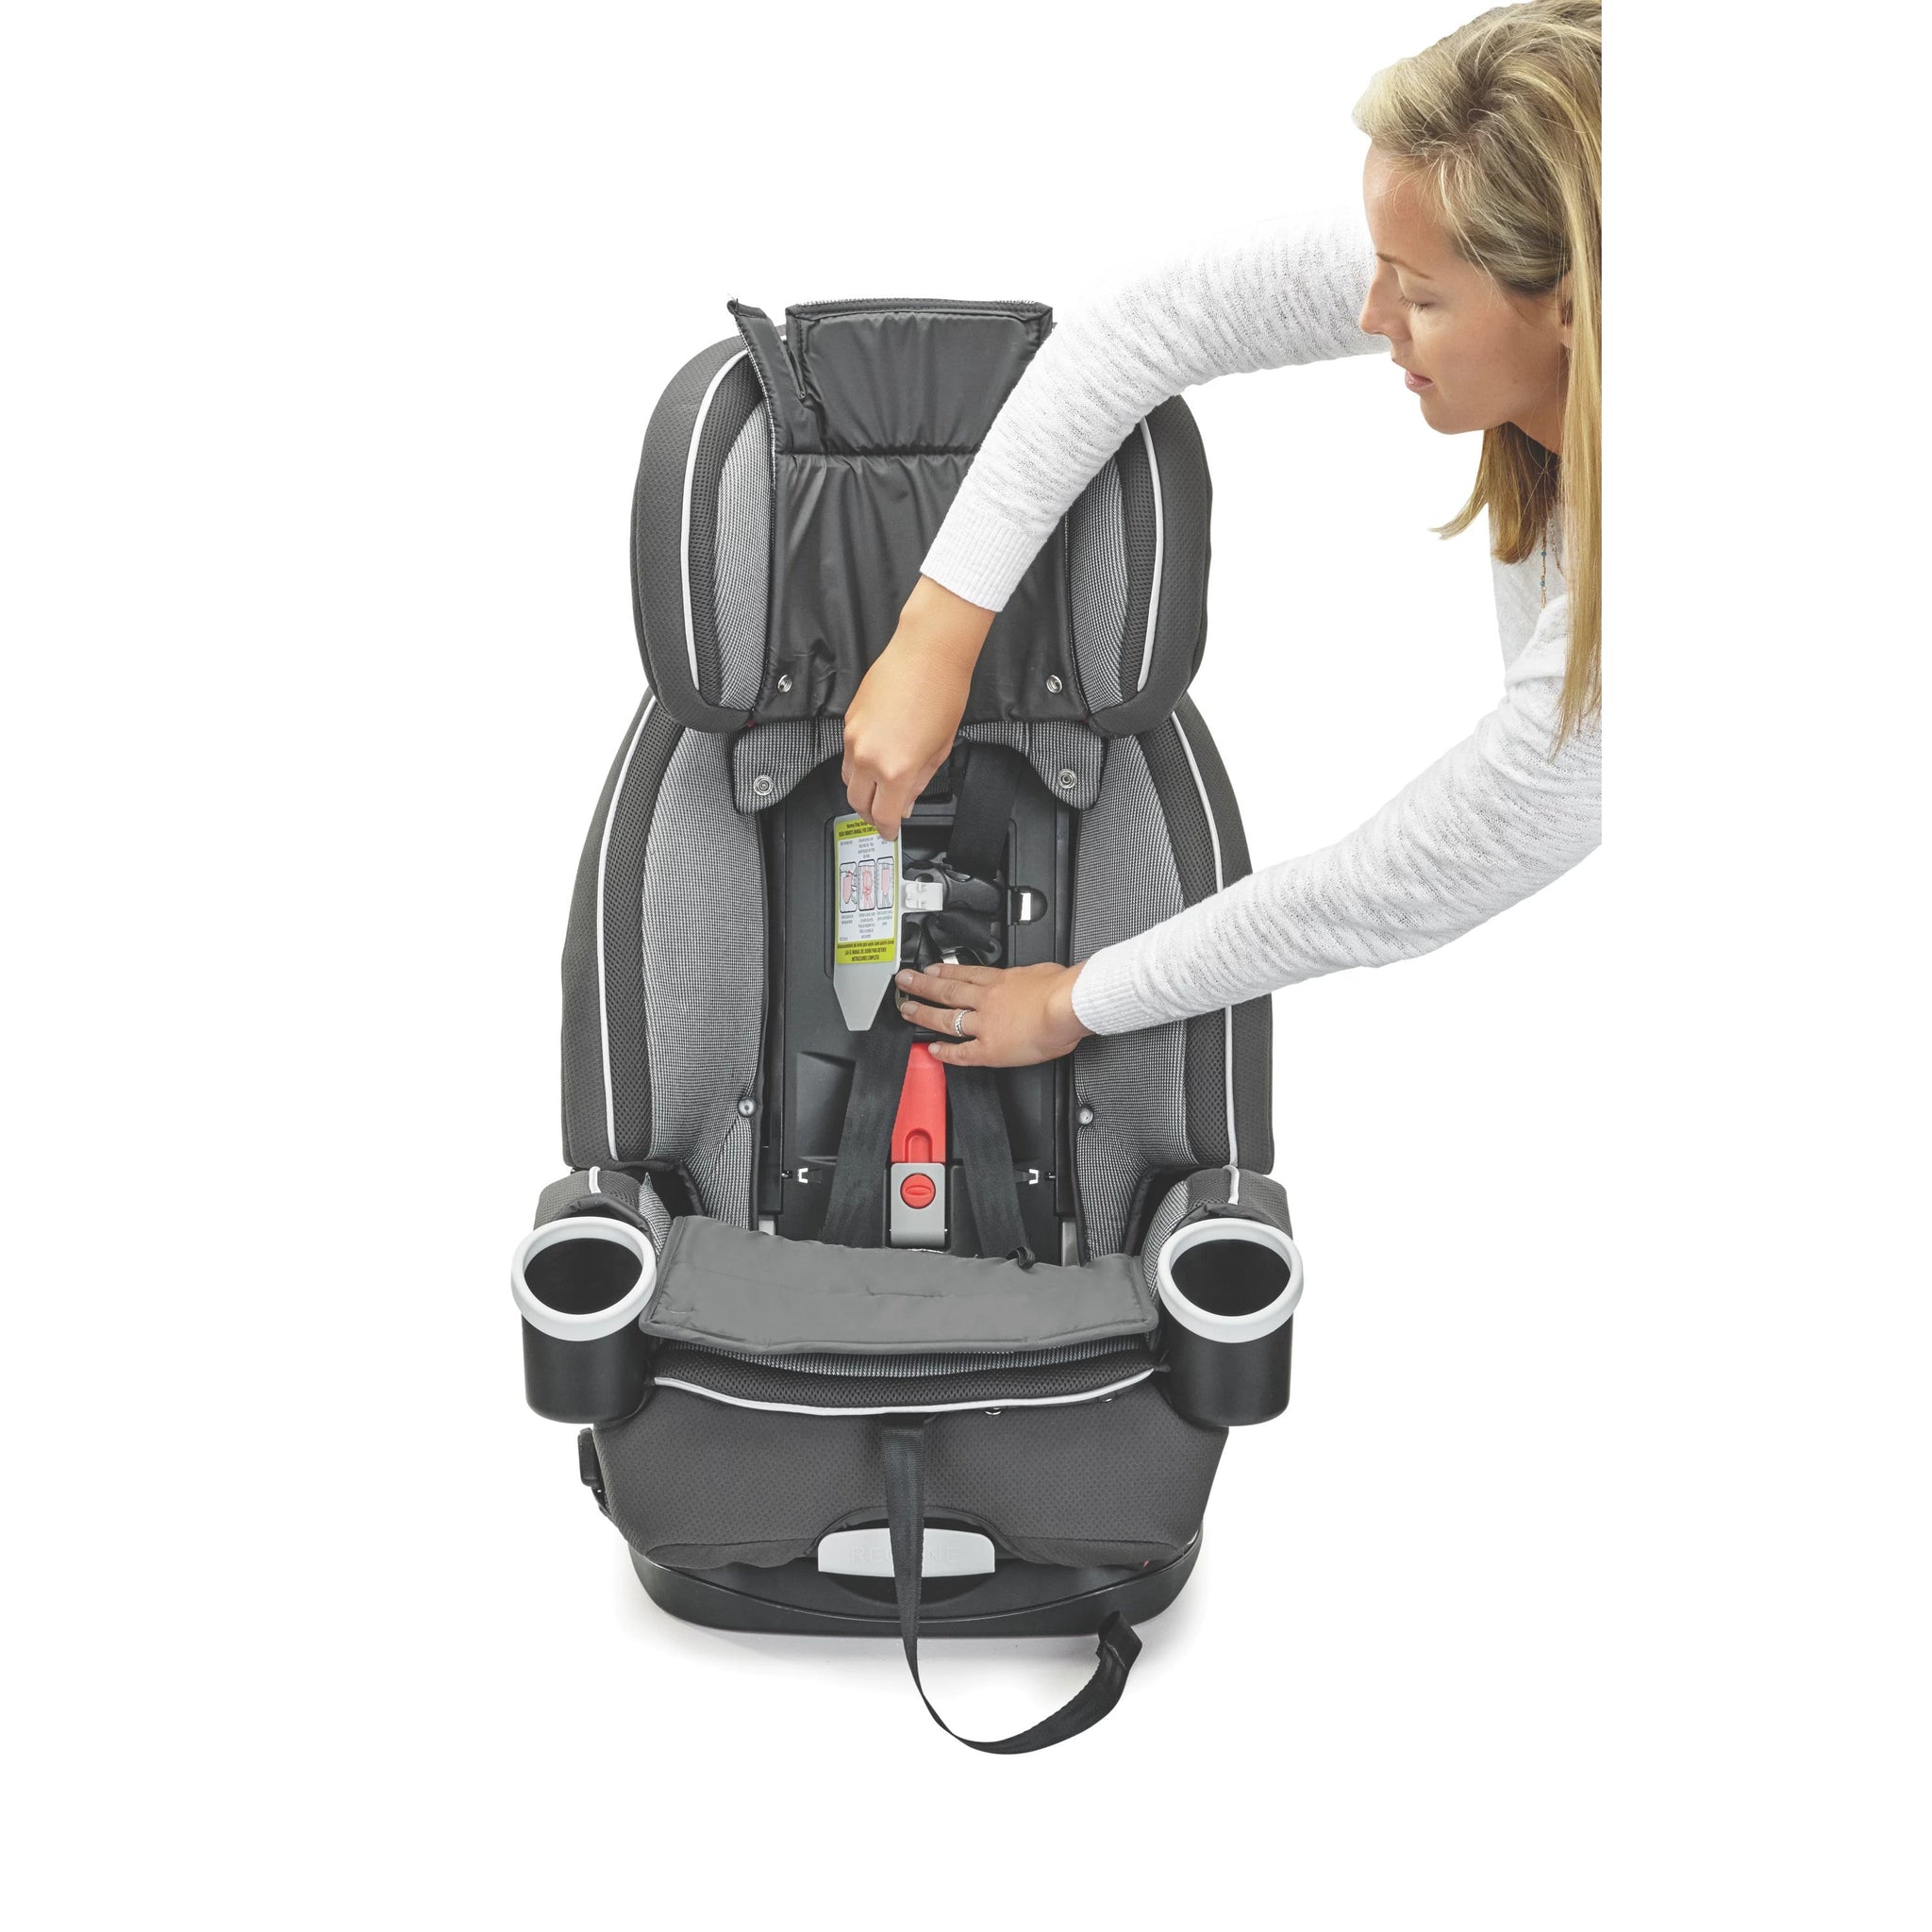 Graco 4Ever® DLX 4-in-1 Convertible Car Seat- Faimont – Babies 